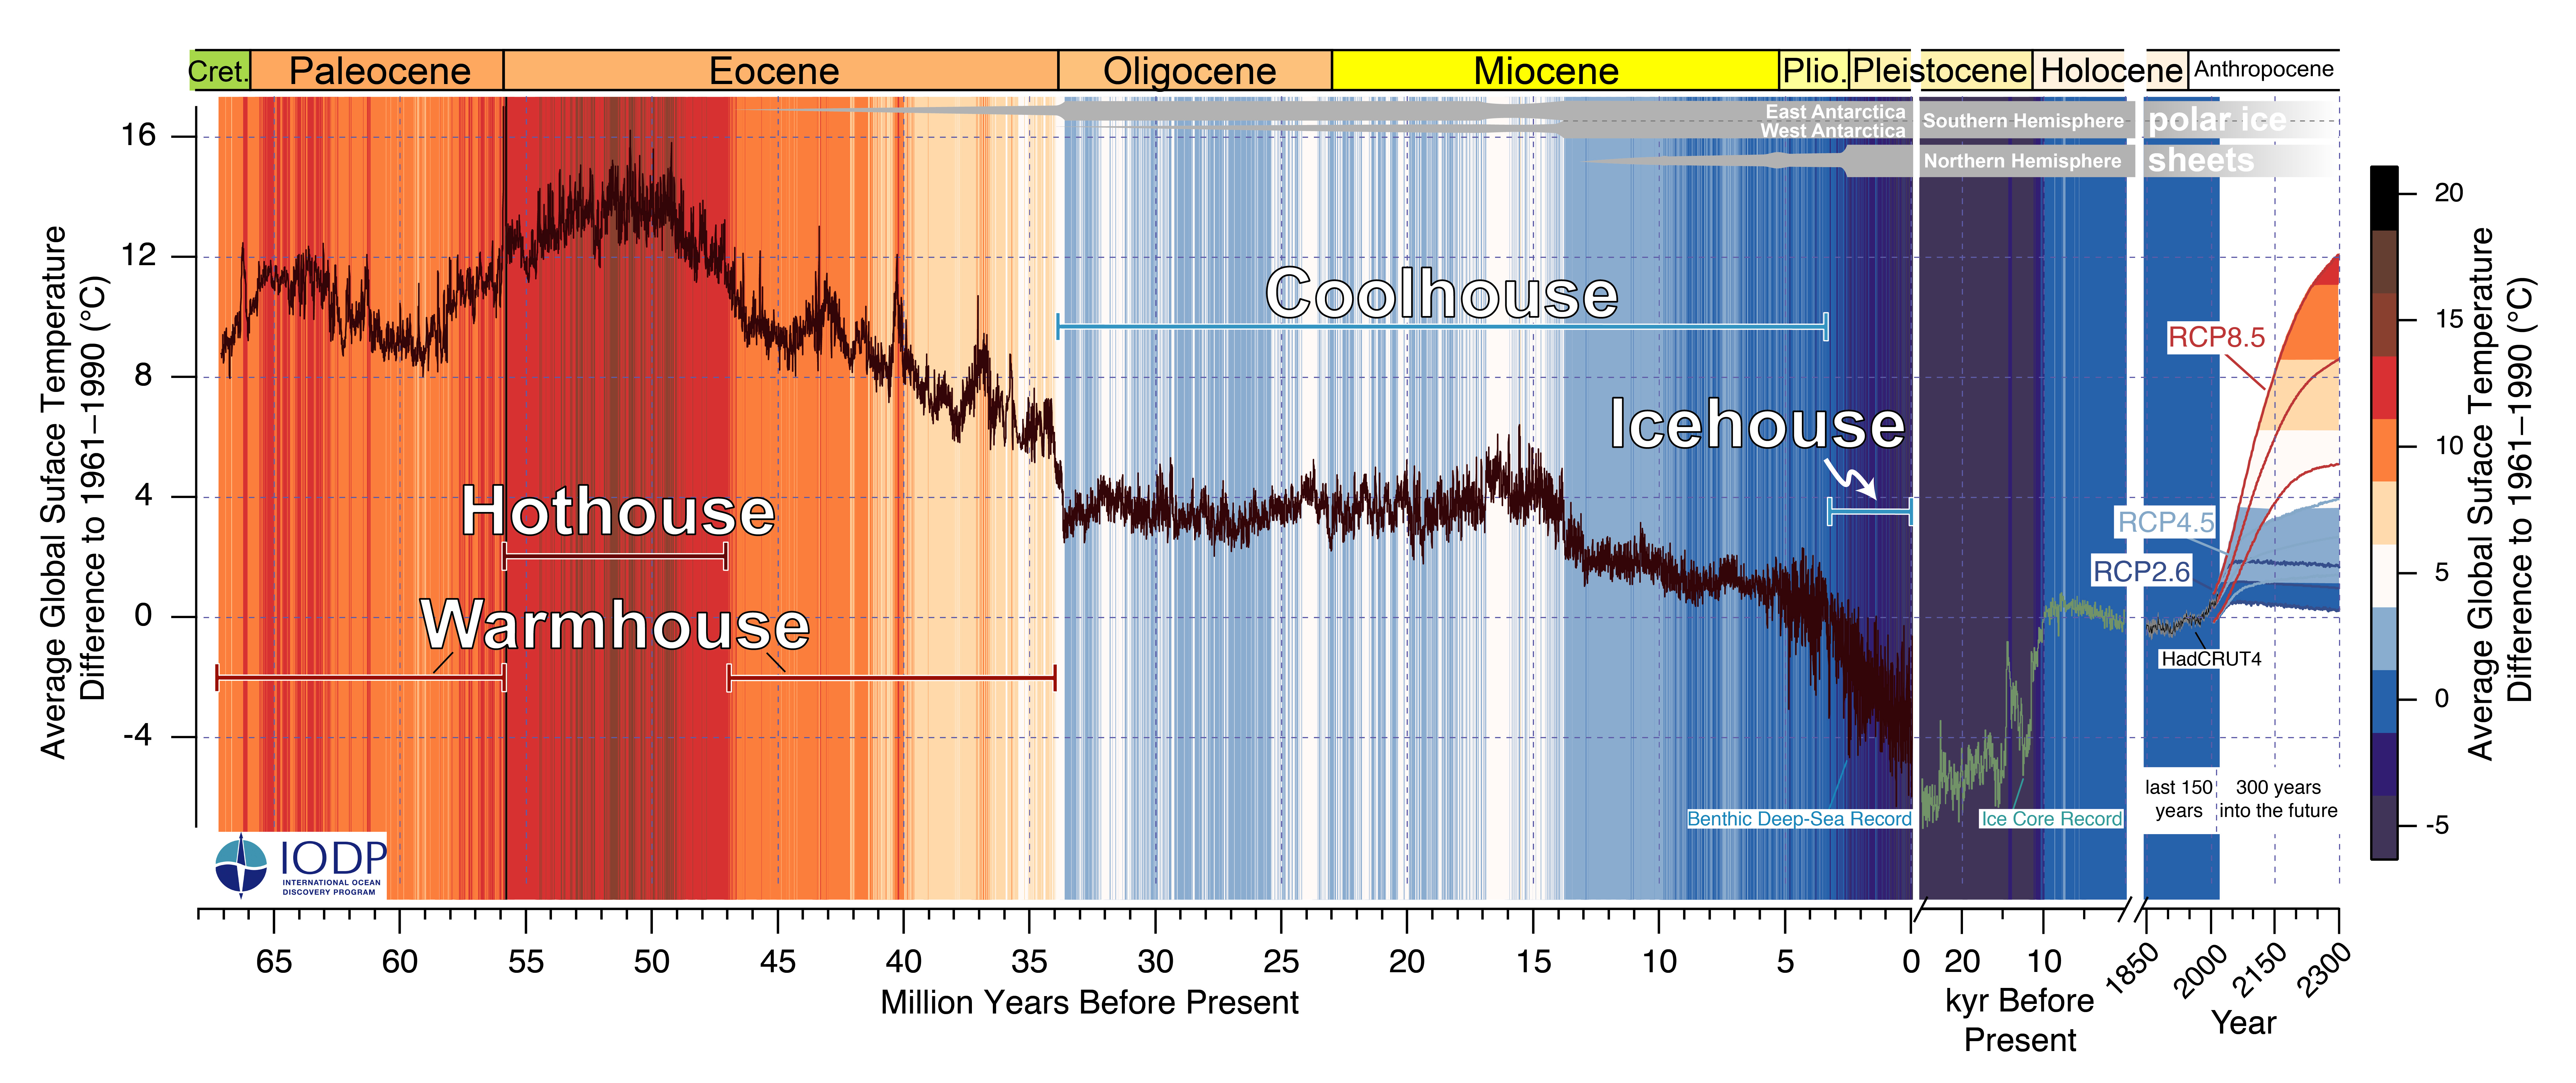 Past and future trends in global mean temperature spanning the last 67 million years